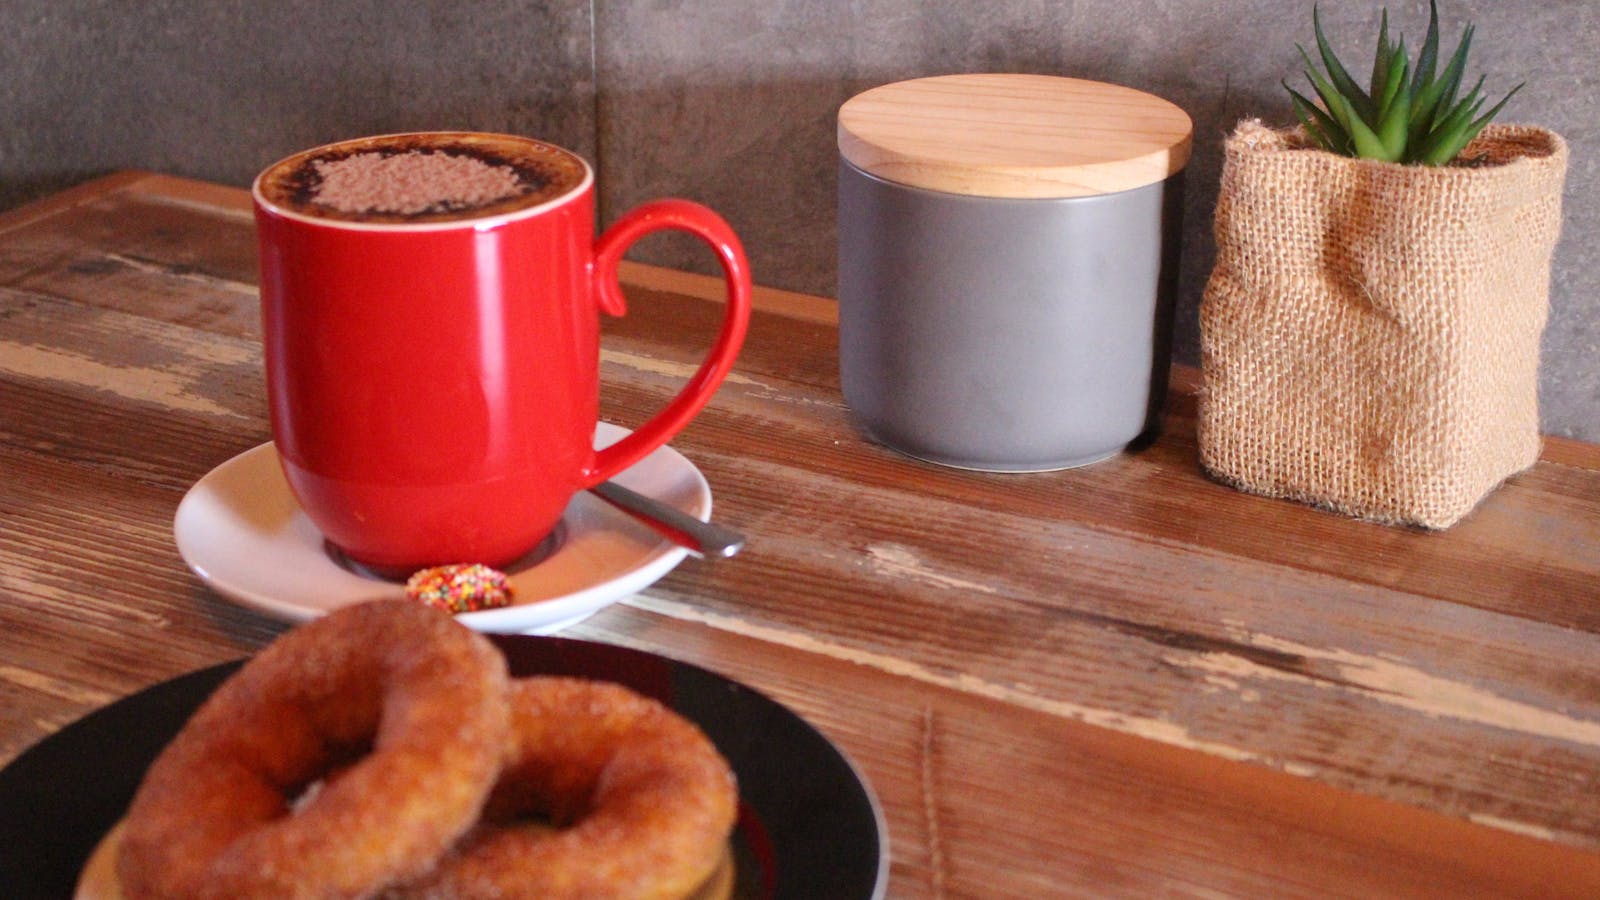 Hot fresh donuts with a cappuccino  - the perfect mix!